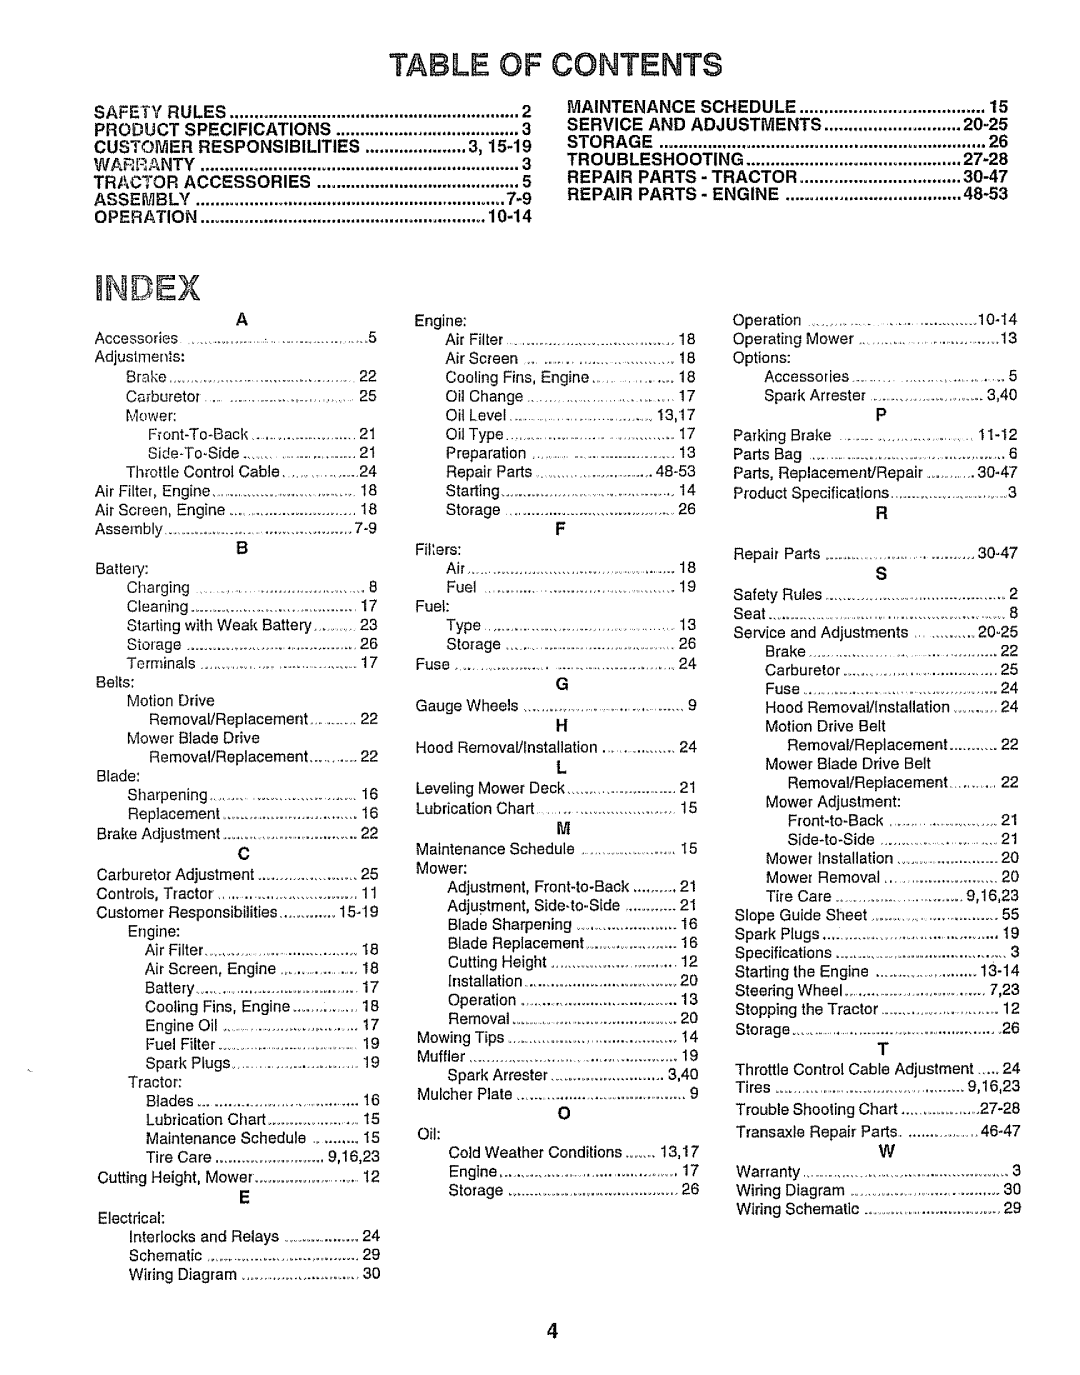 Sears 917.25958 manual Index, Table Of Contents 